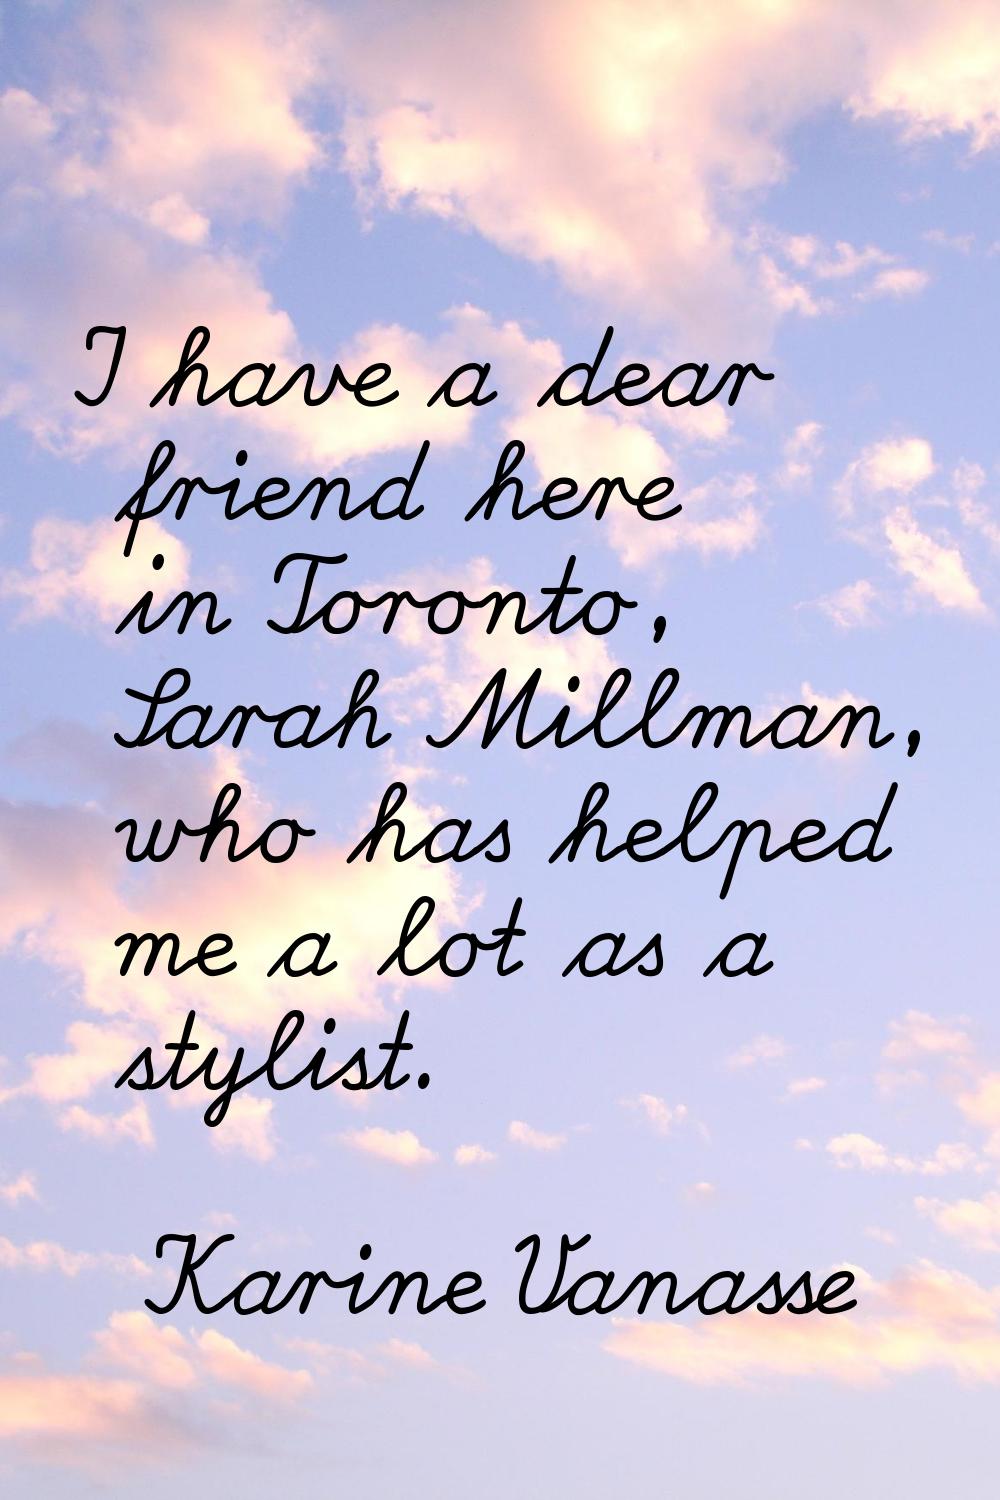 I have a dear friend here in Toronto, Sarah Millman, who has helped me a lot as a stylist.